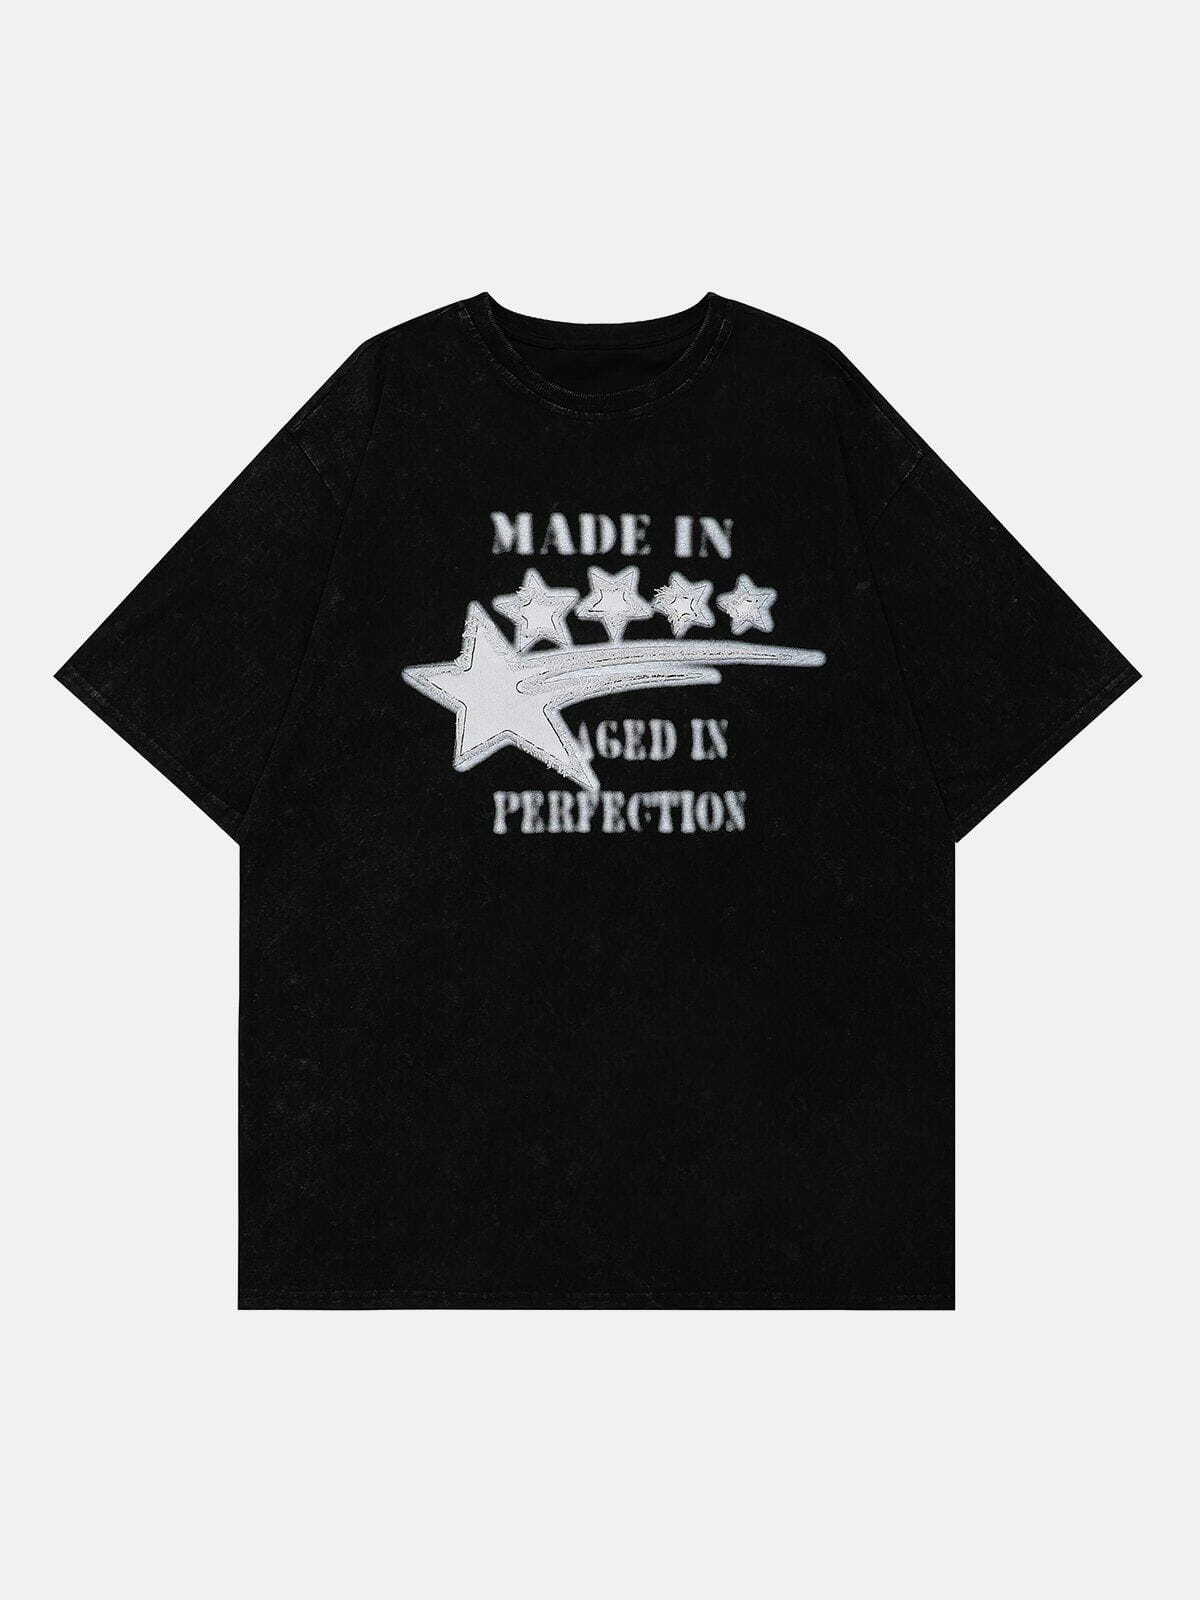 embroidered star patch tee quirky & retro streetwear 2746